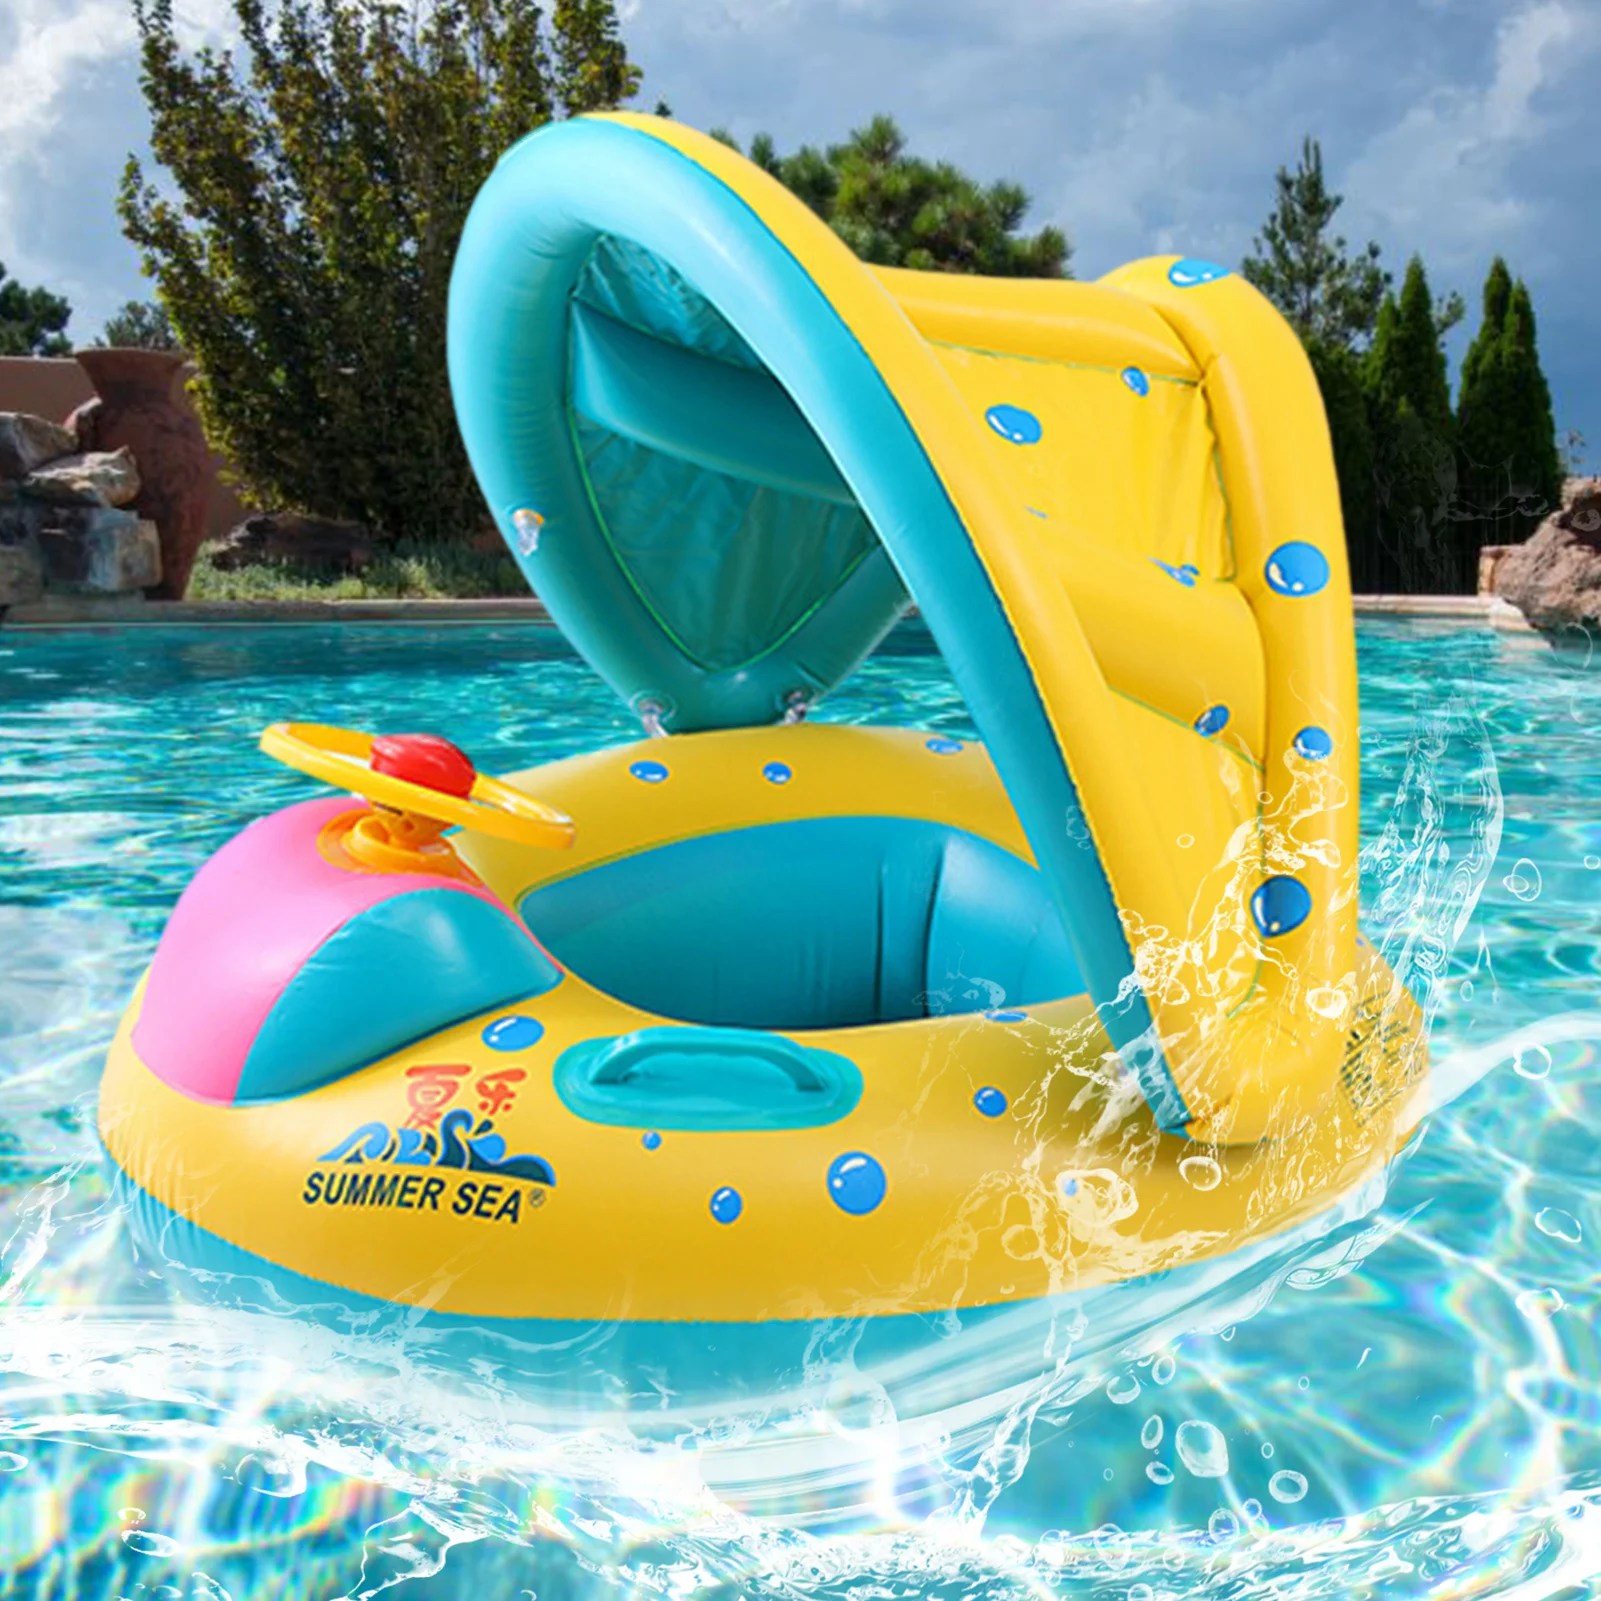 Inflatable Swan Baby Swimming Pool Rings Float Fun Seat Boats Waters Kids Summer 